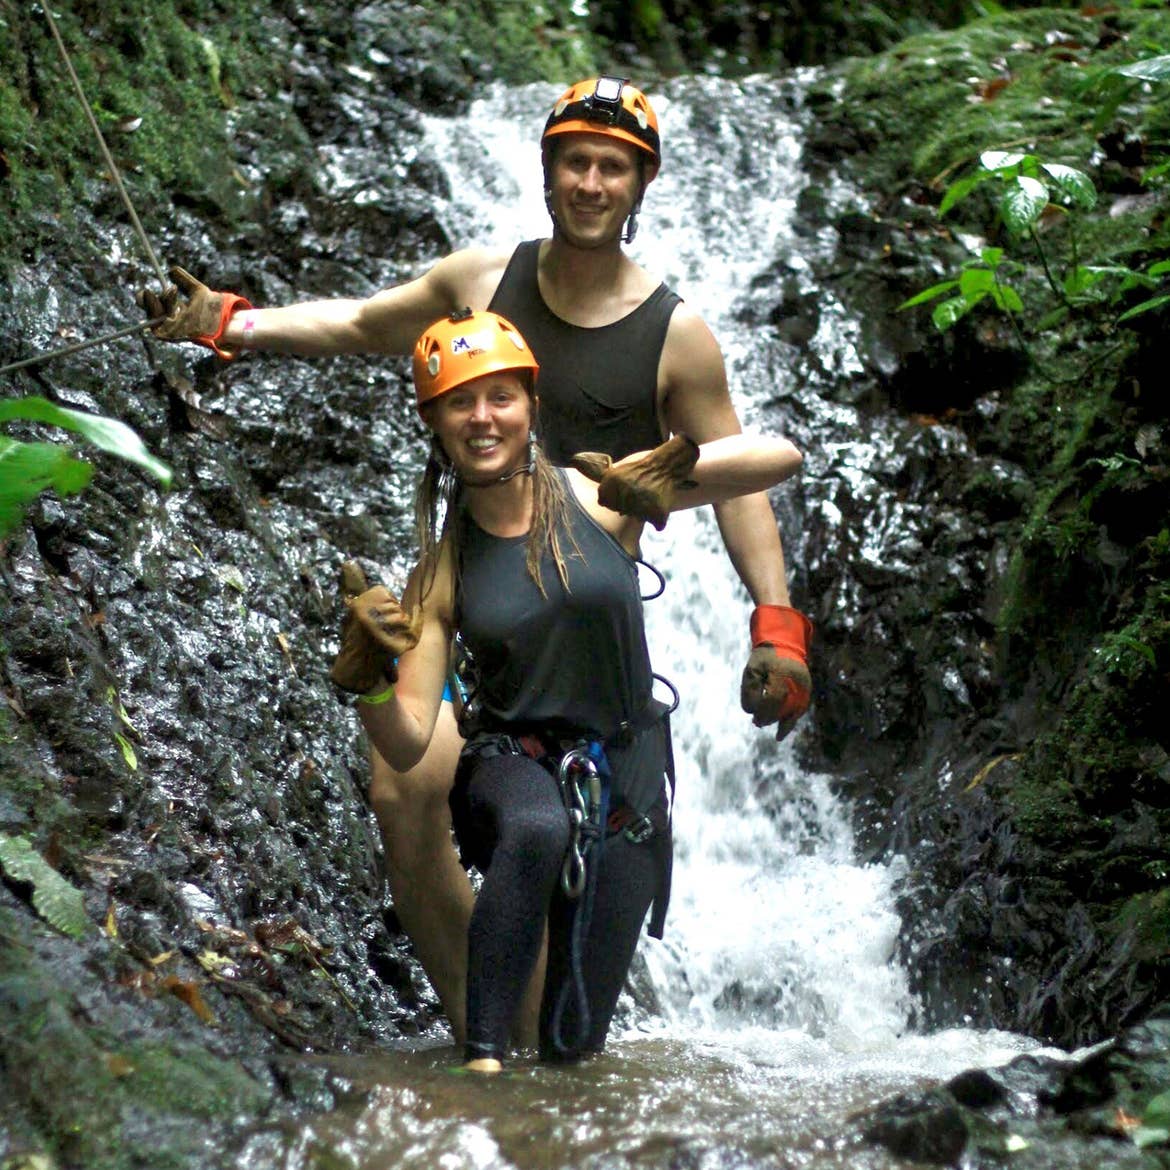 Featured contributor, Tiffany (front) and her husband (back) climb through a ravine in Costa Rica.